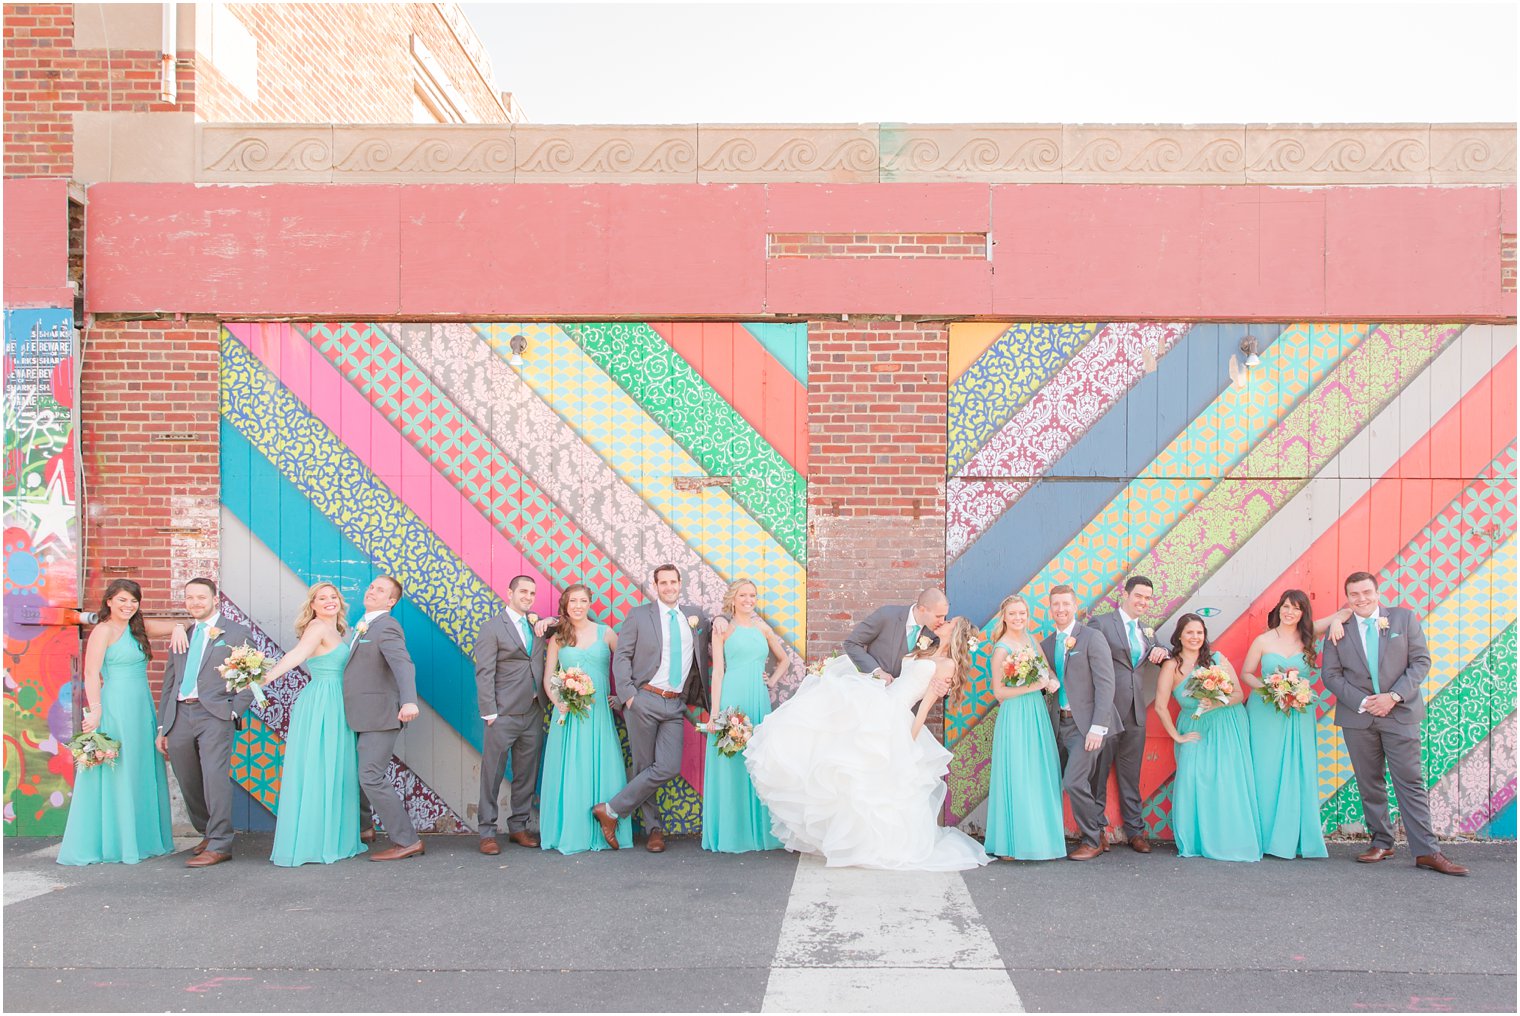 Bridal party photo with murals in Asbury Park